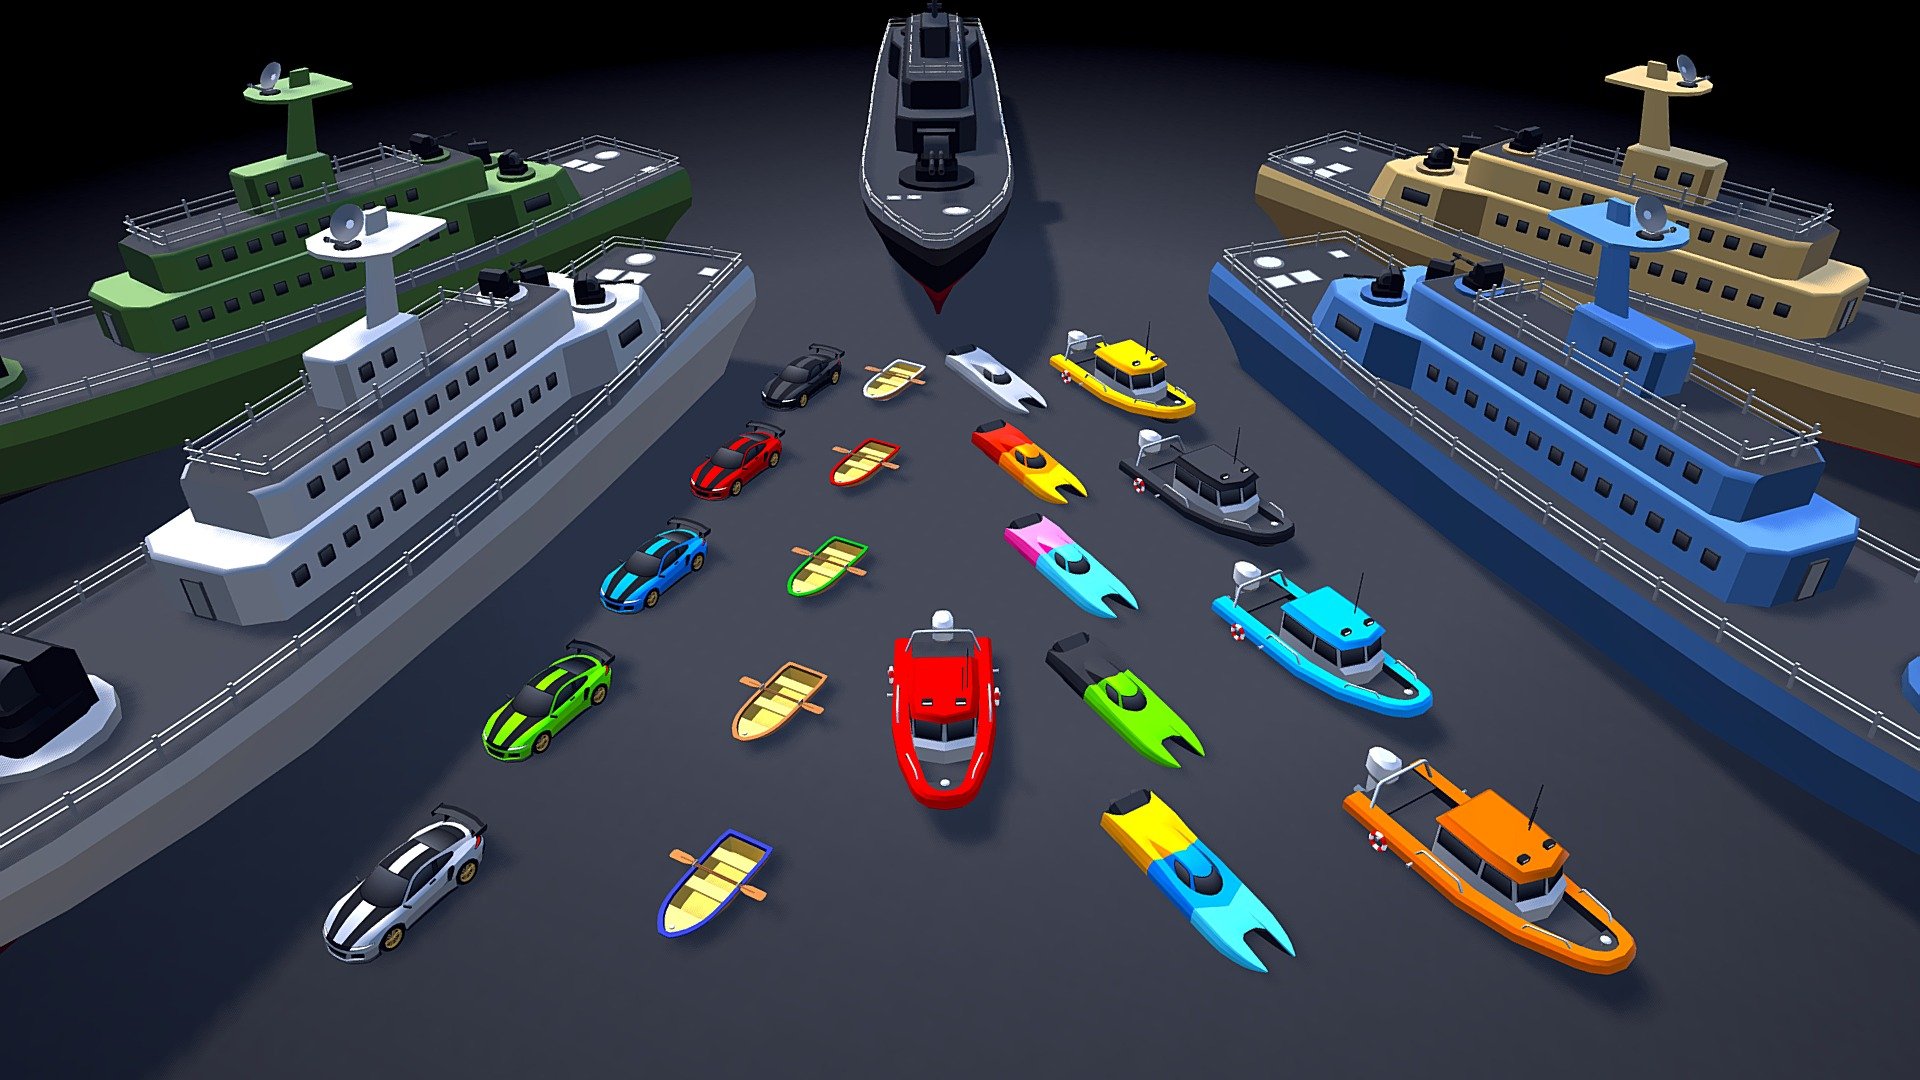 This is the (free) September update of my asset called ARCADE: Ultimate Vehicles Pack. This update will be launched on September 8th. Available in Unity3D (in the Unity Asset Store) and Sketchfab! (FBX + UNITY Files included).

The update includes water vehicles!. I hope you like it.

NOTE: Battle ships have been rescaled for demonstration purposes.

Best regards, Mena 3d model